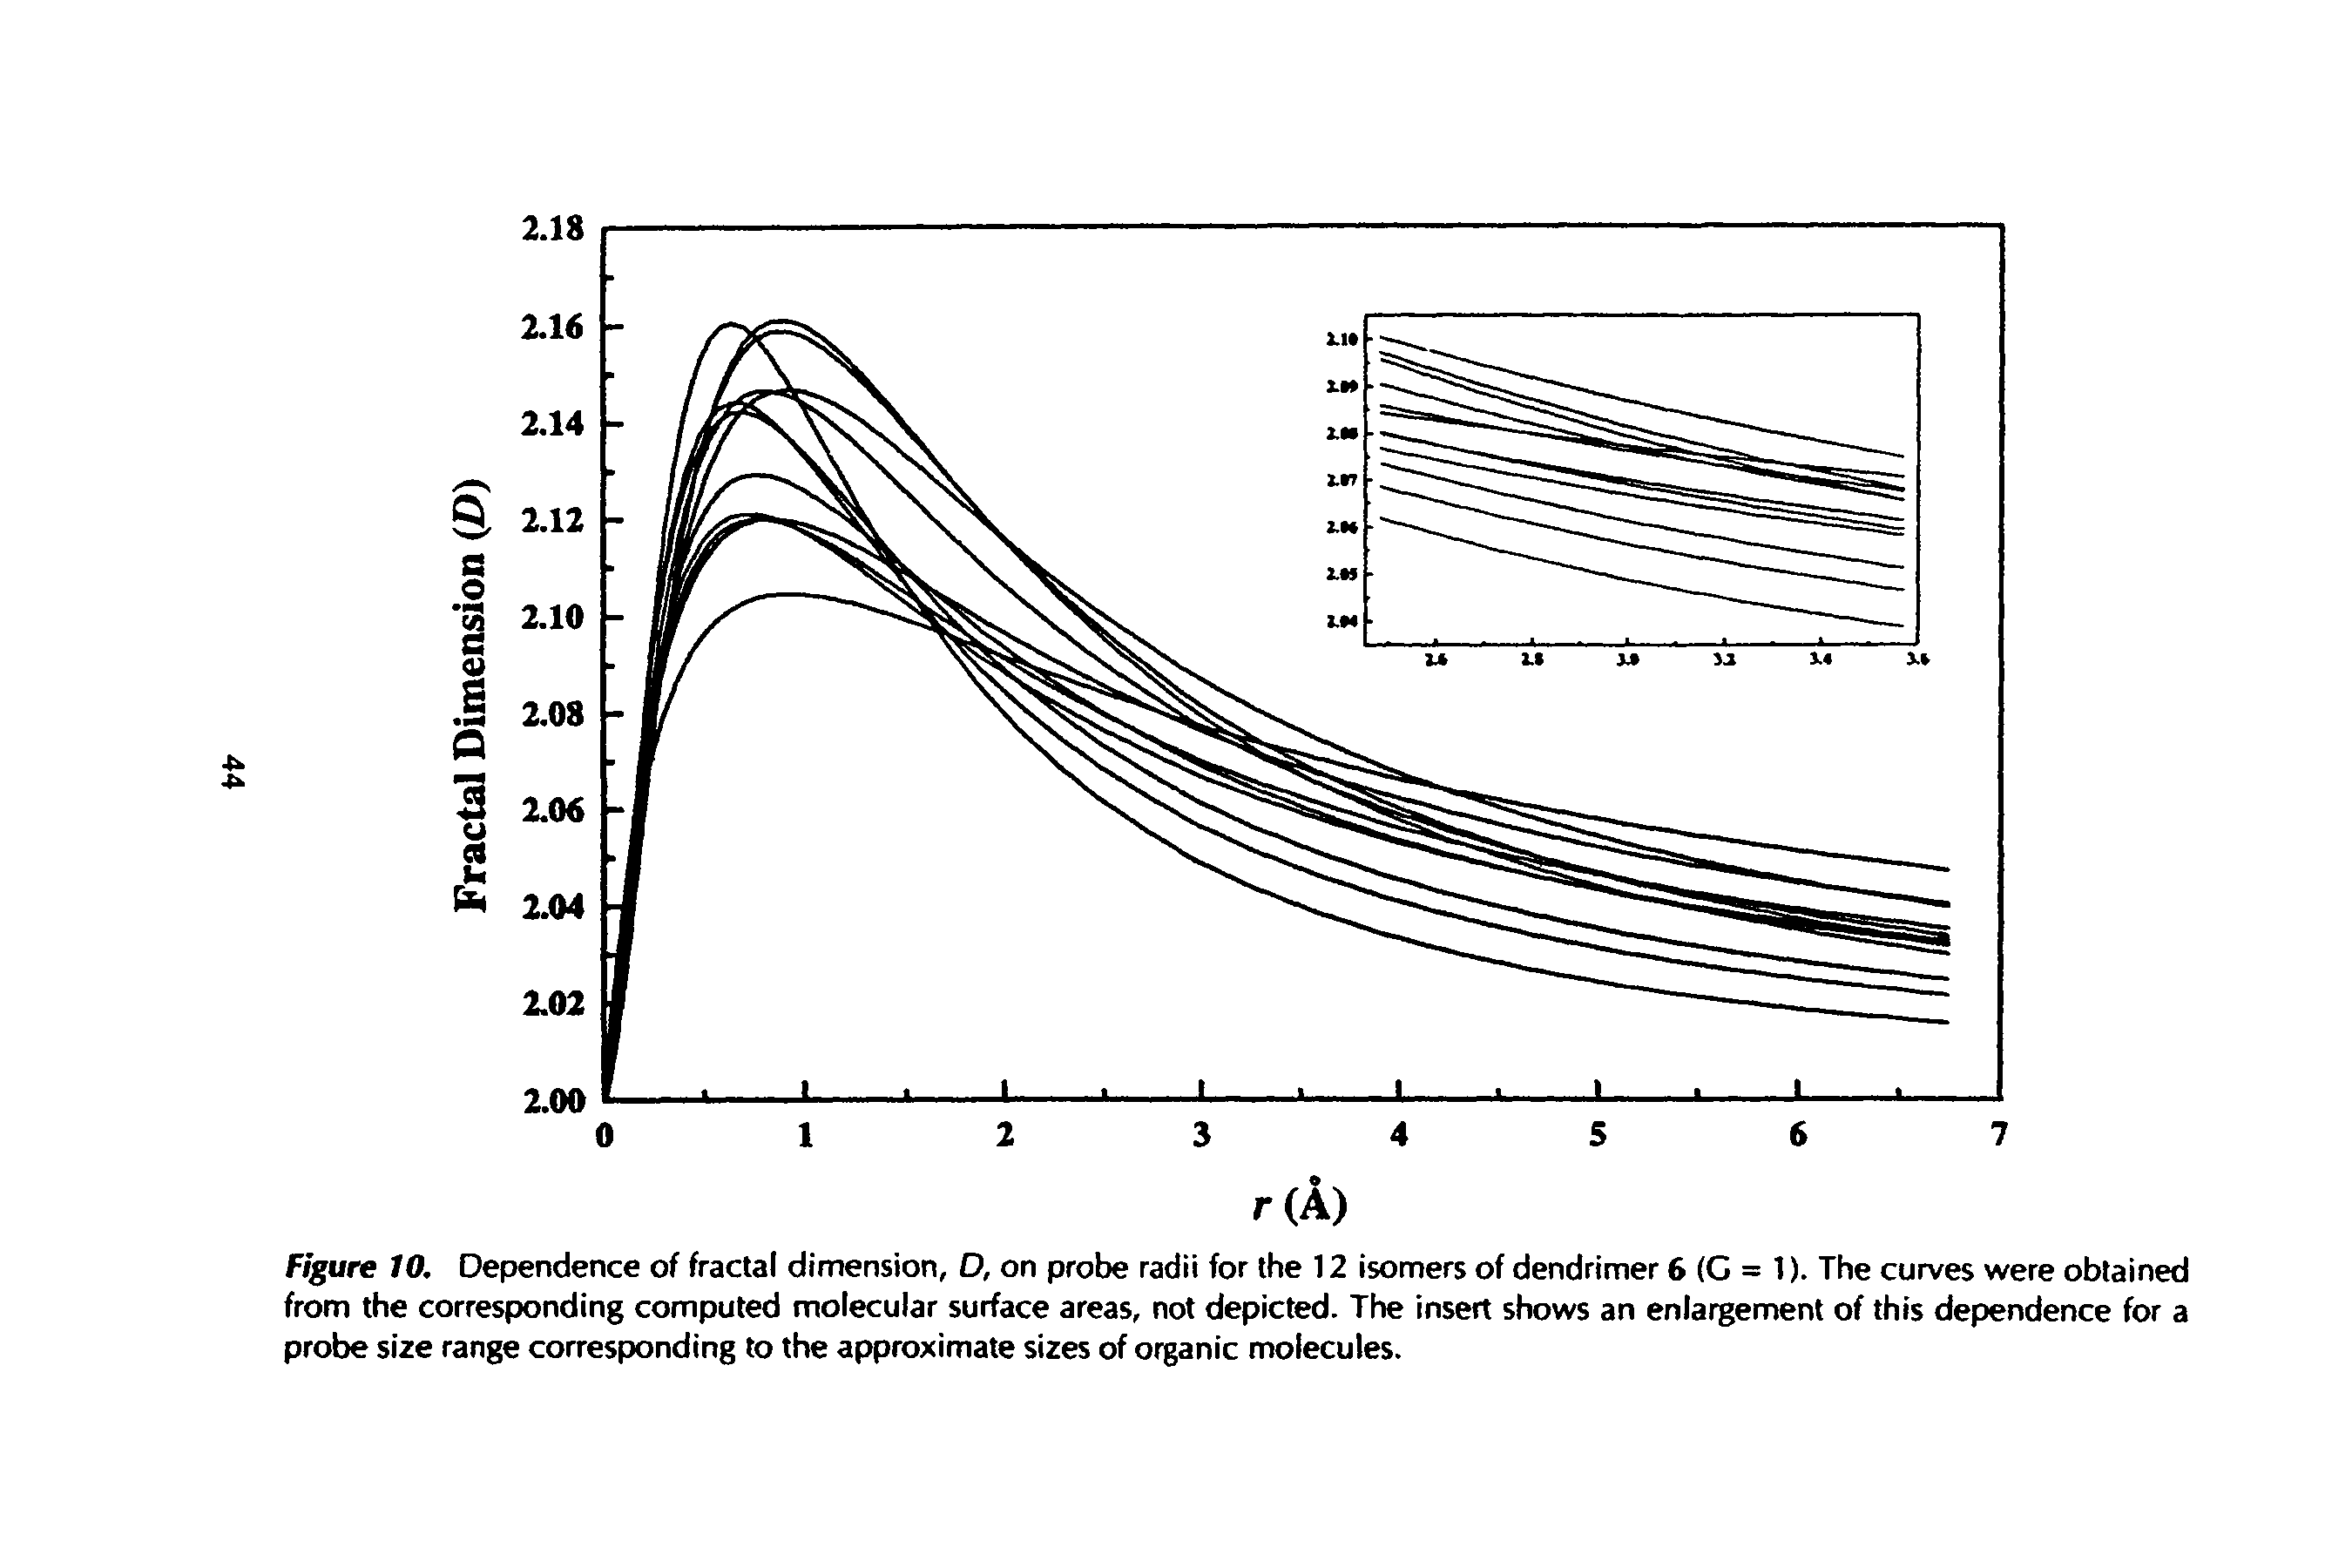 Figure 10. Dependence of fractal dimension, D, on probe radii for the 12 isomers of dendrimer 6 (C = 1). The curves were obtained from the corresponding computed molecular surface areas, not depicted. The insert shows an enlargement of this dependence for a probe size range corresponding to the approximate sizes of organic molecules.